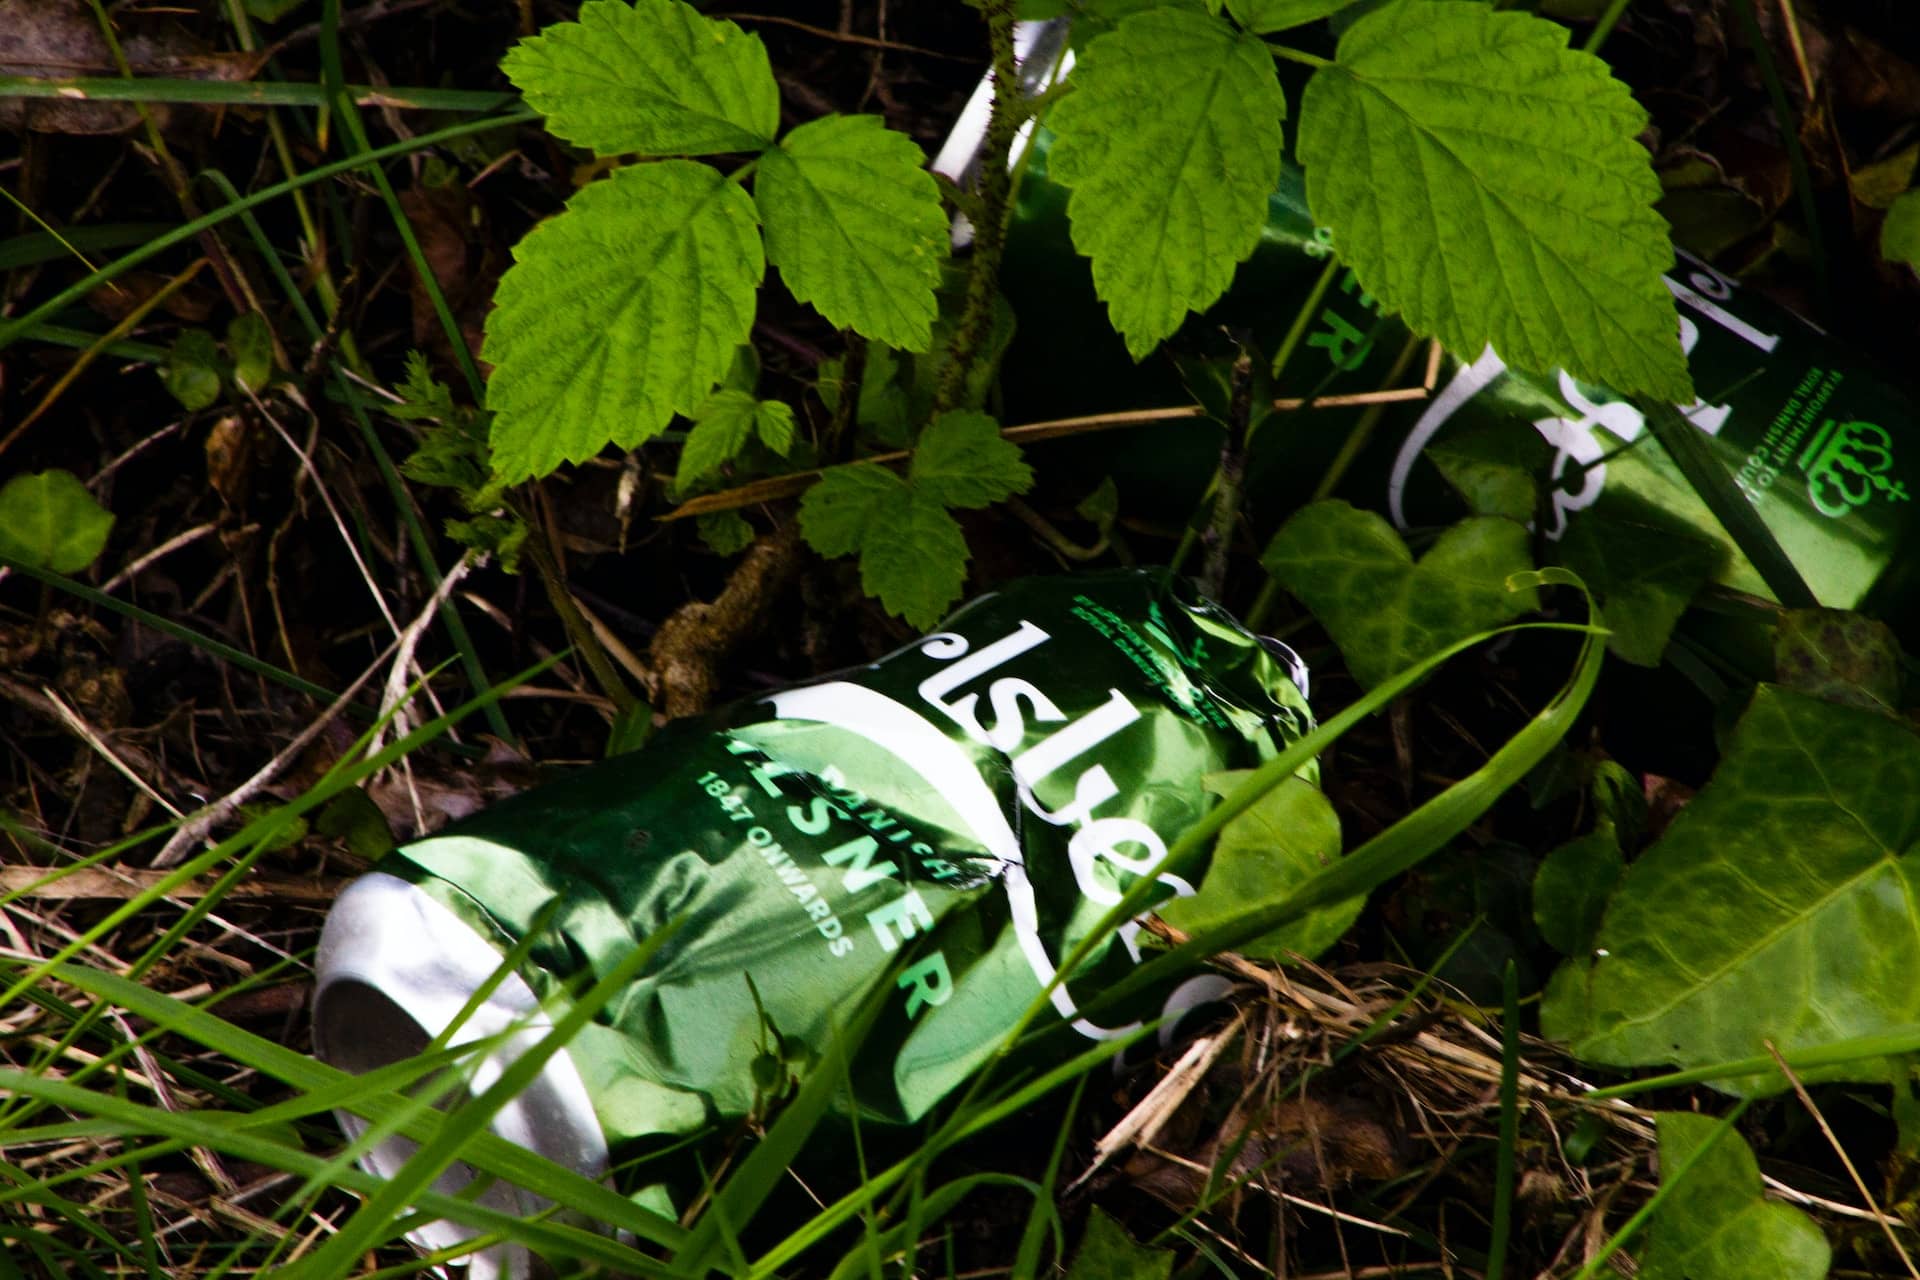 Carlsberg cans littering the countryside